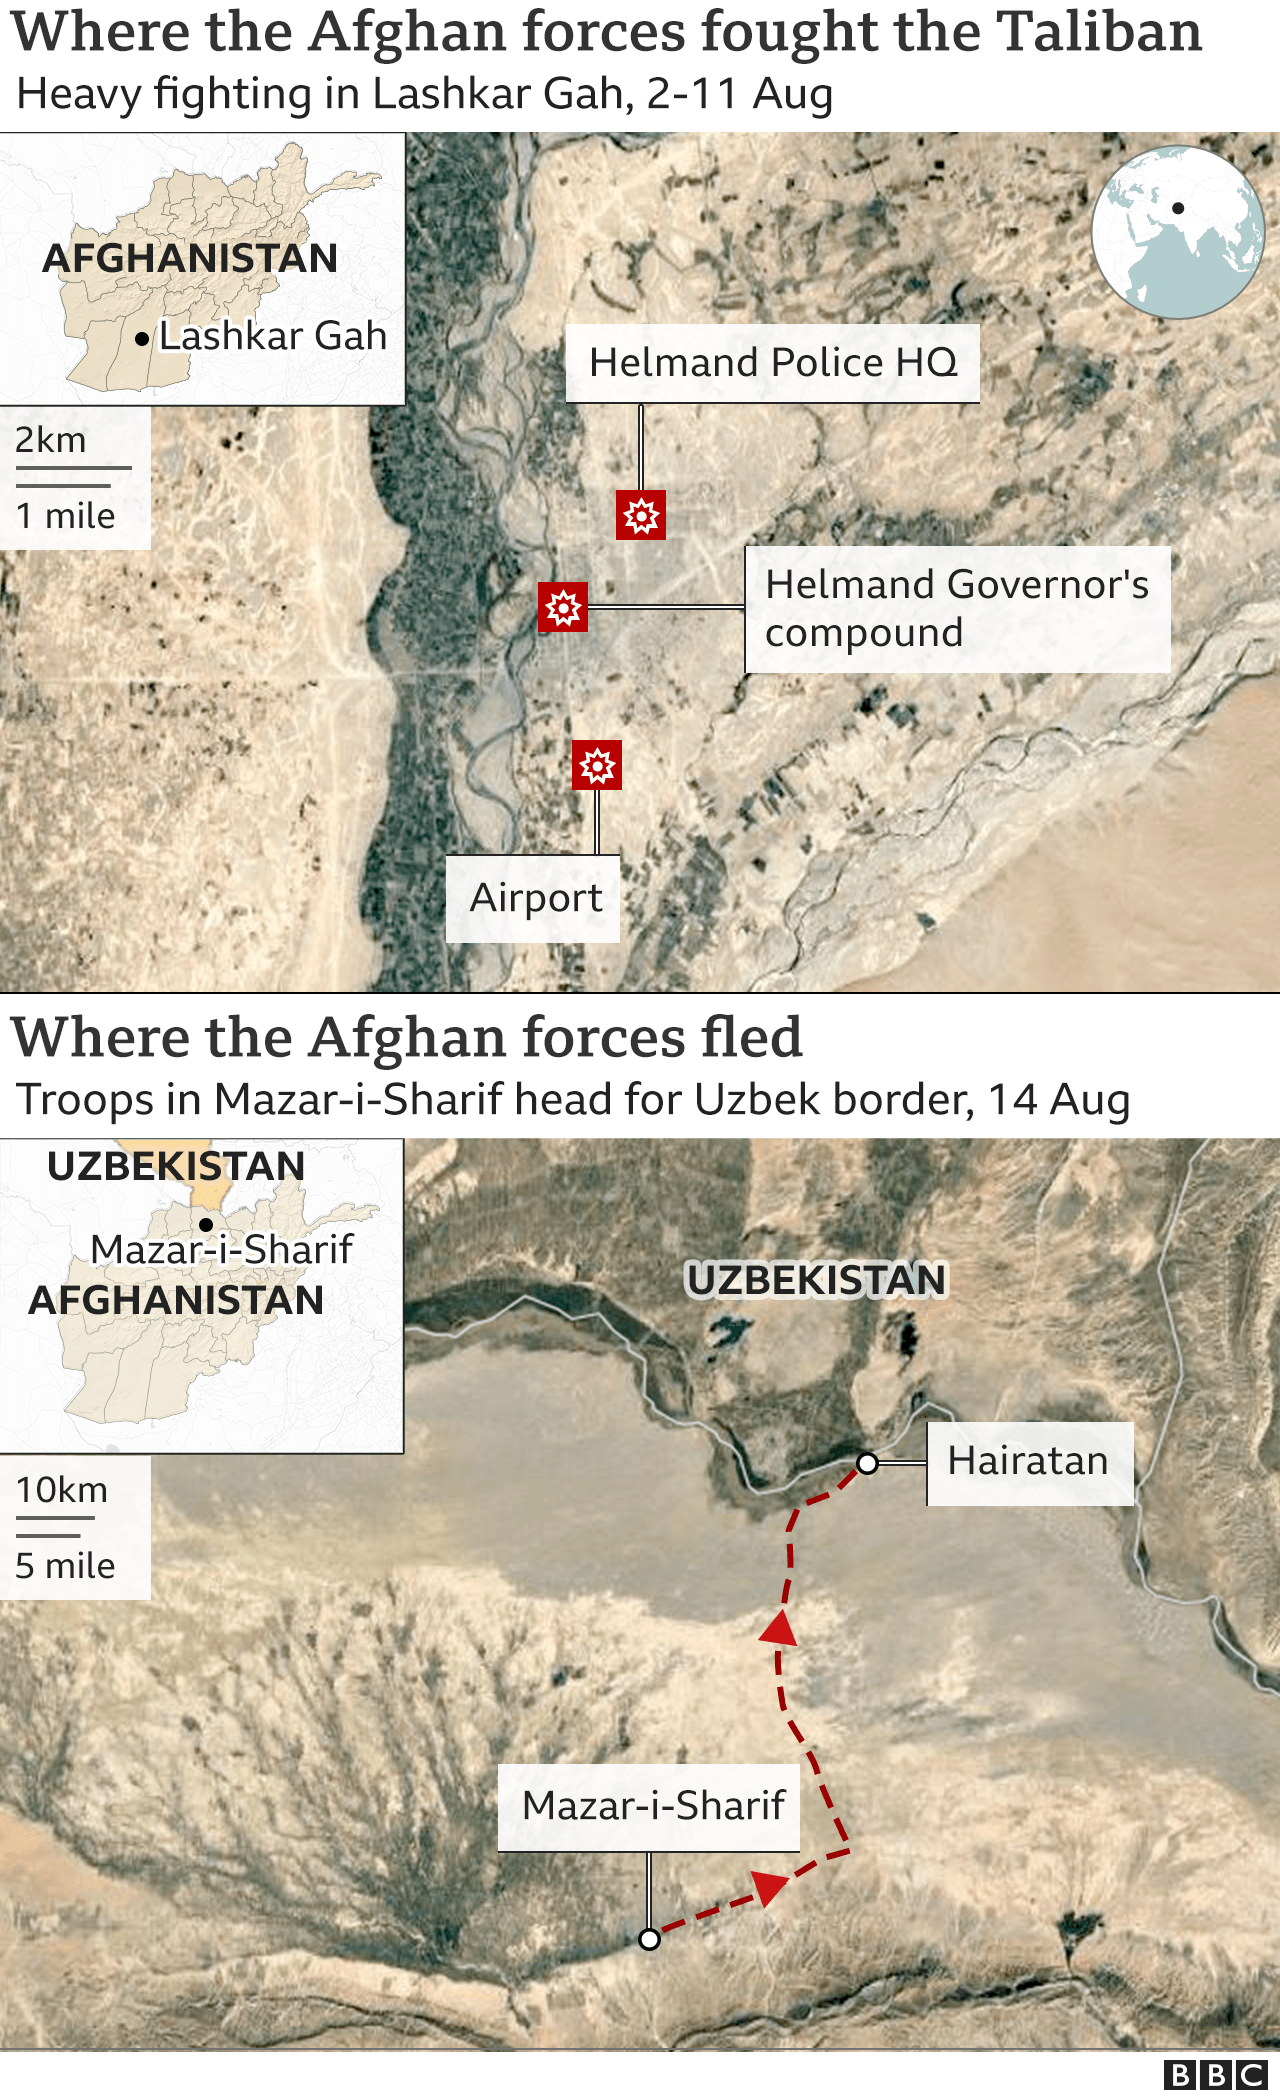 Maps of where the security forces fought and where they fled. Updated 17 Aug.